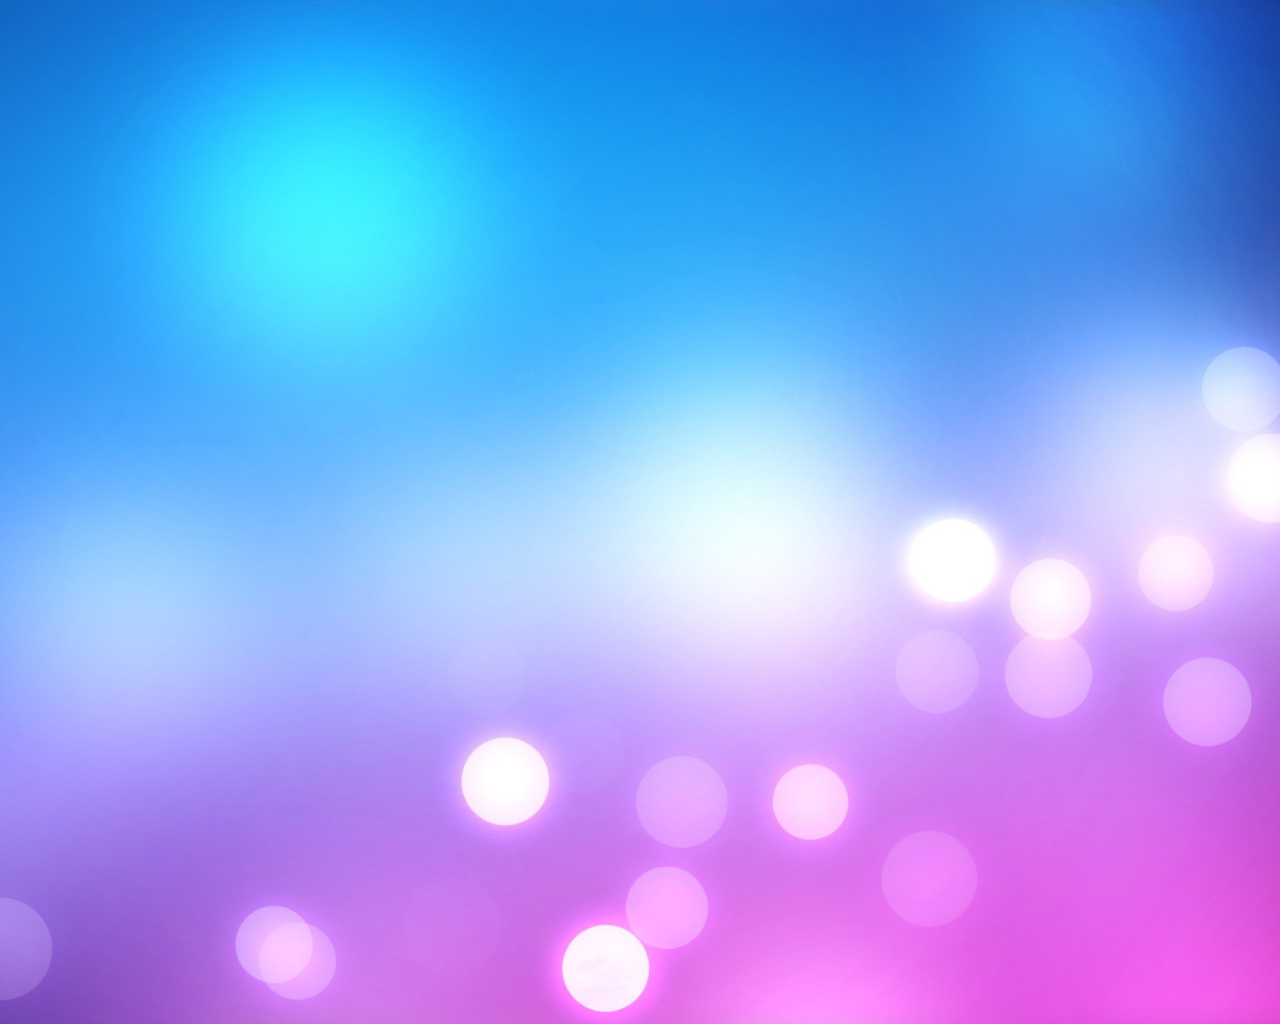 Blue and pink background